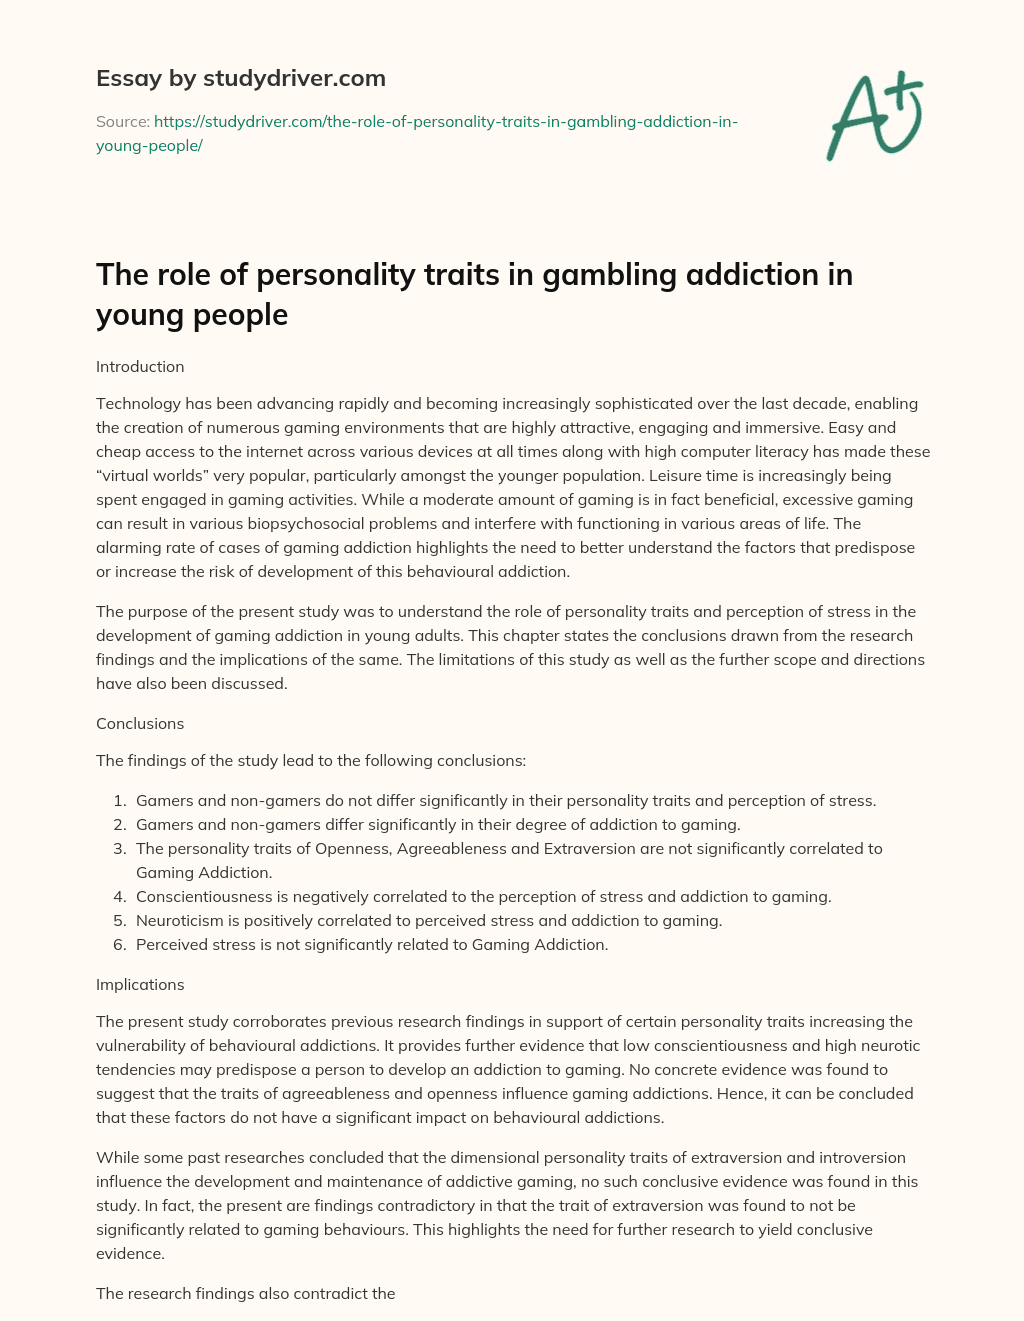 The Role of Personality Traits in Gambling Addiction in Young People essay